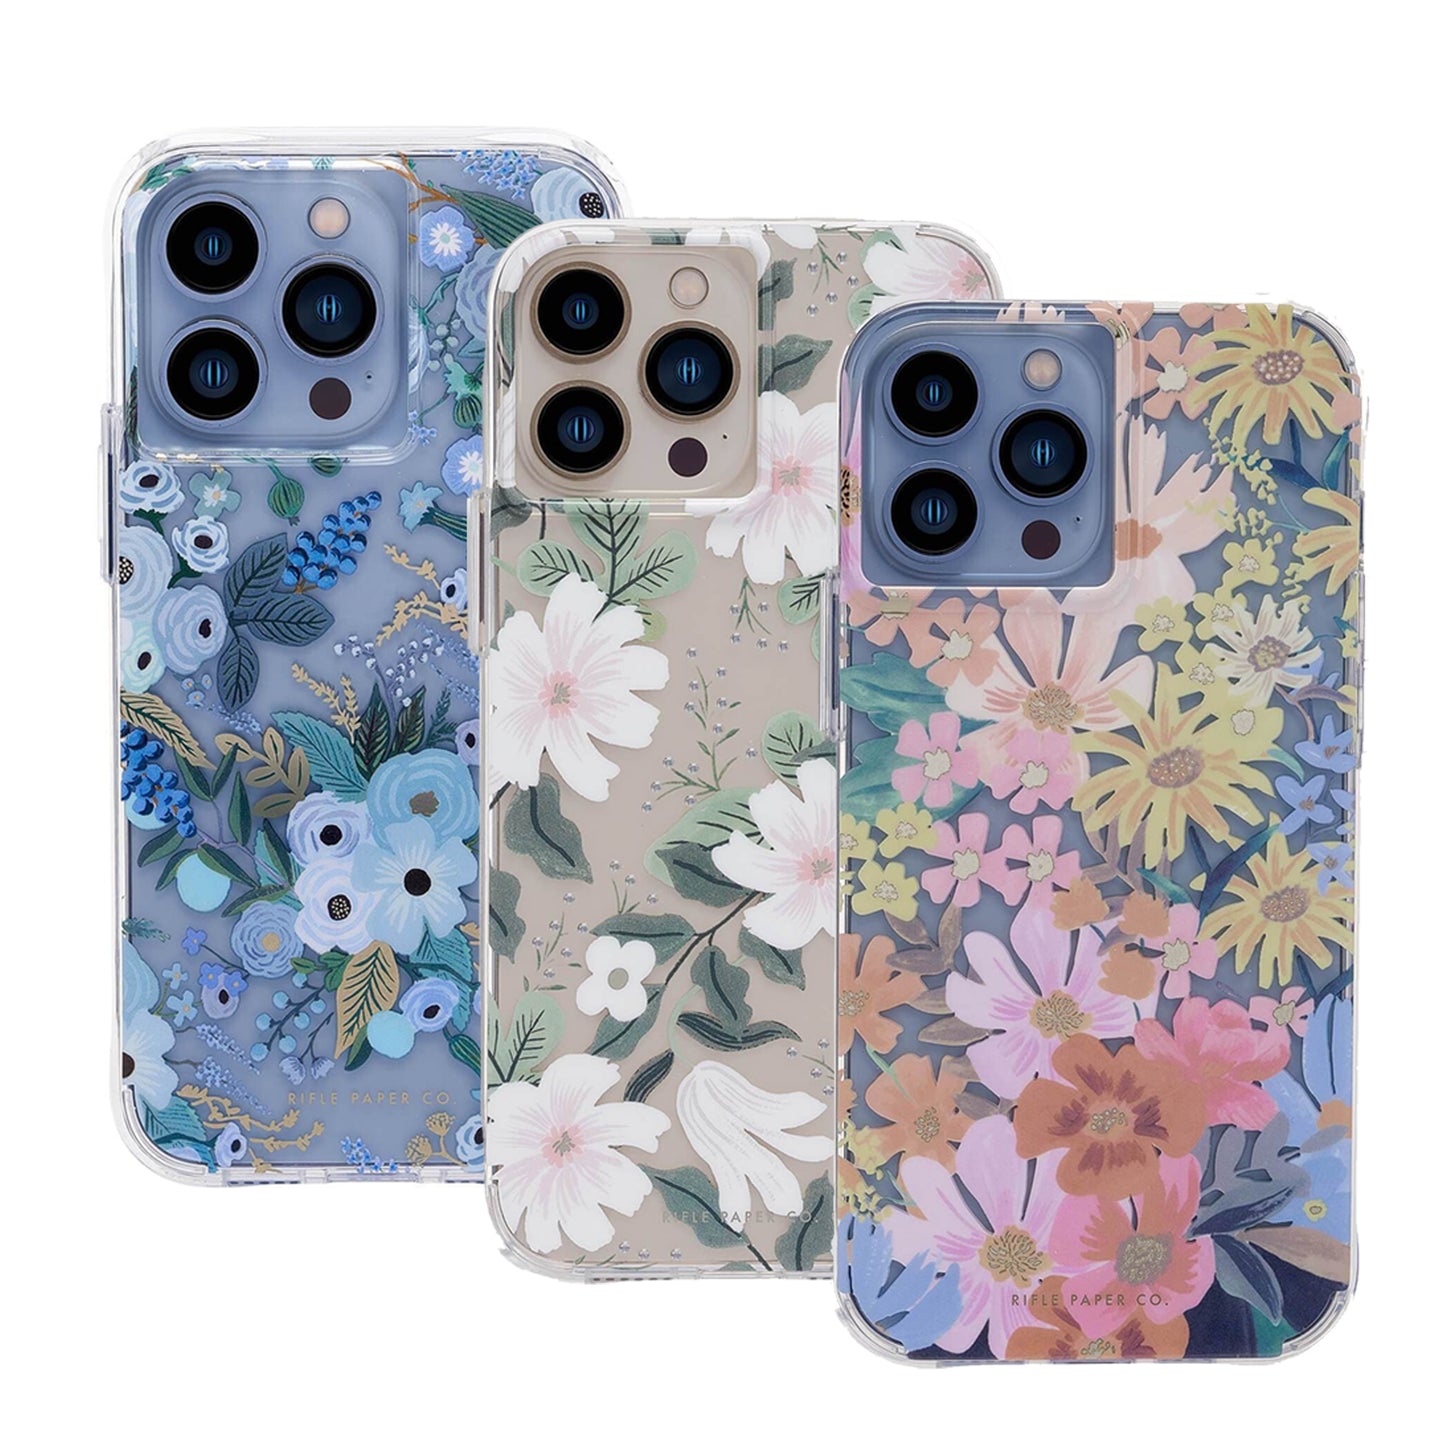 Case-Mate Rifle Paper Co. for iPhone 13 6.1" 5G with Antimicrobial - Garden Party Blue (Barcode: 840171706901 )